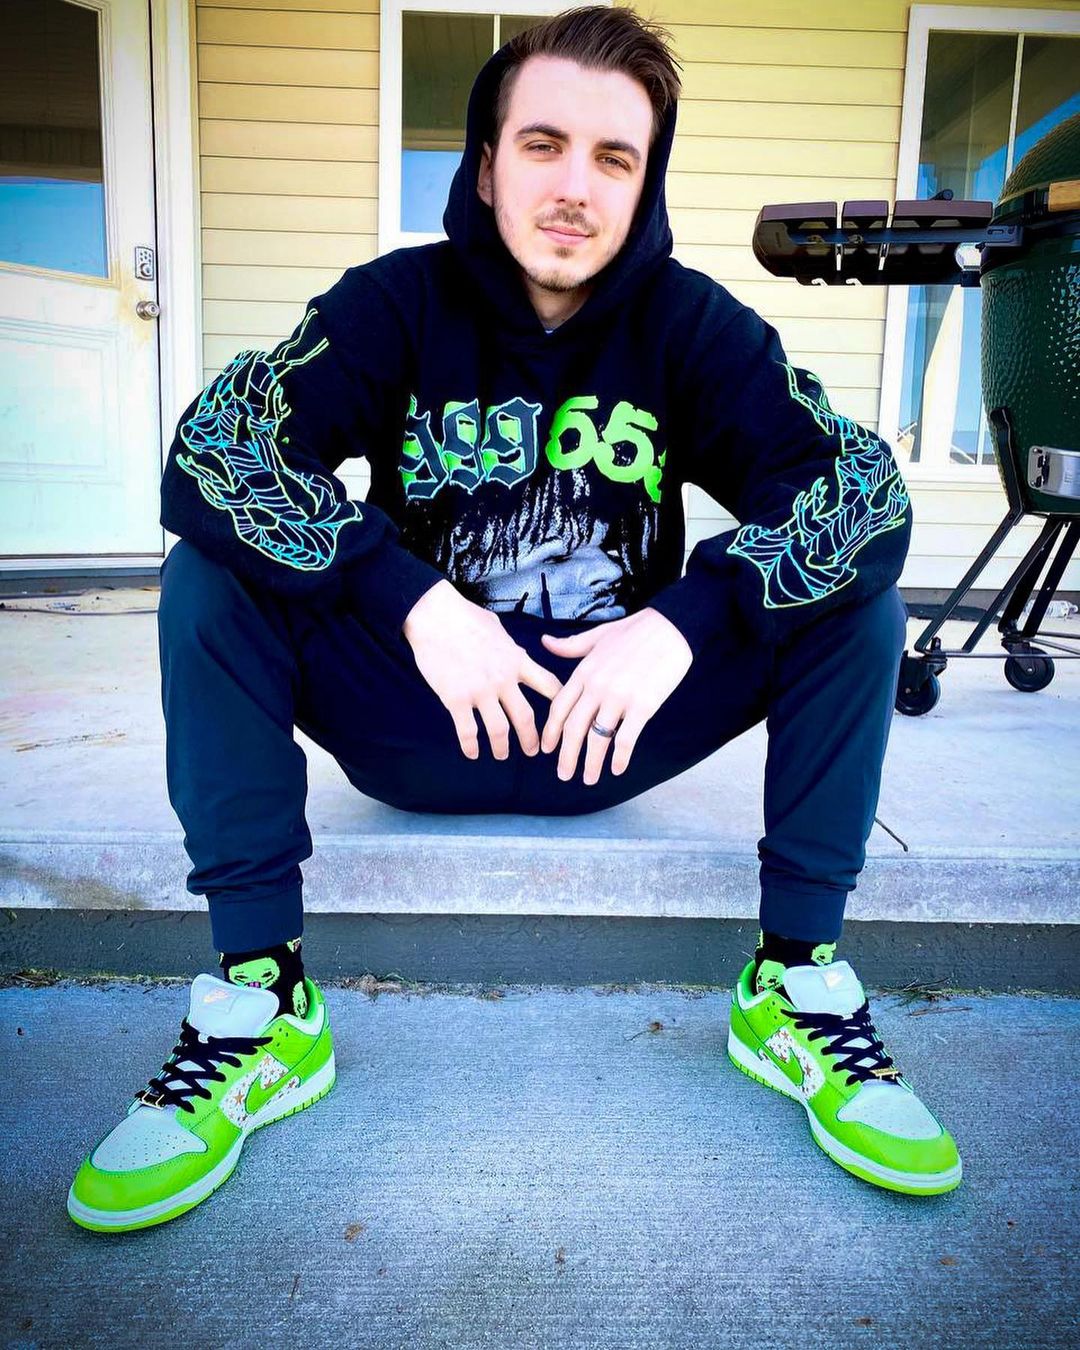 You are currently viewing Chris Tyson (MrBeast) Bio, Age, Wife, Height & Birthday